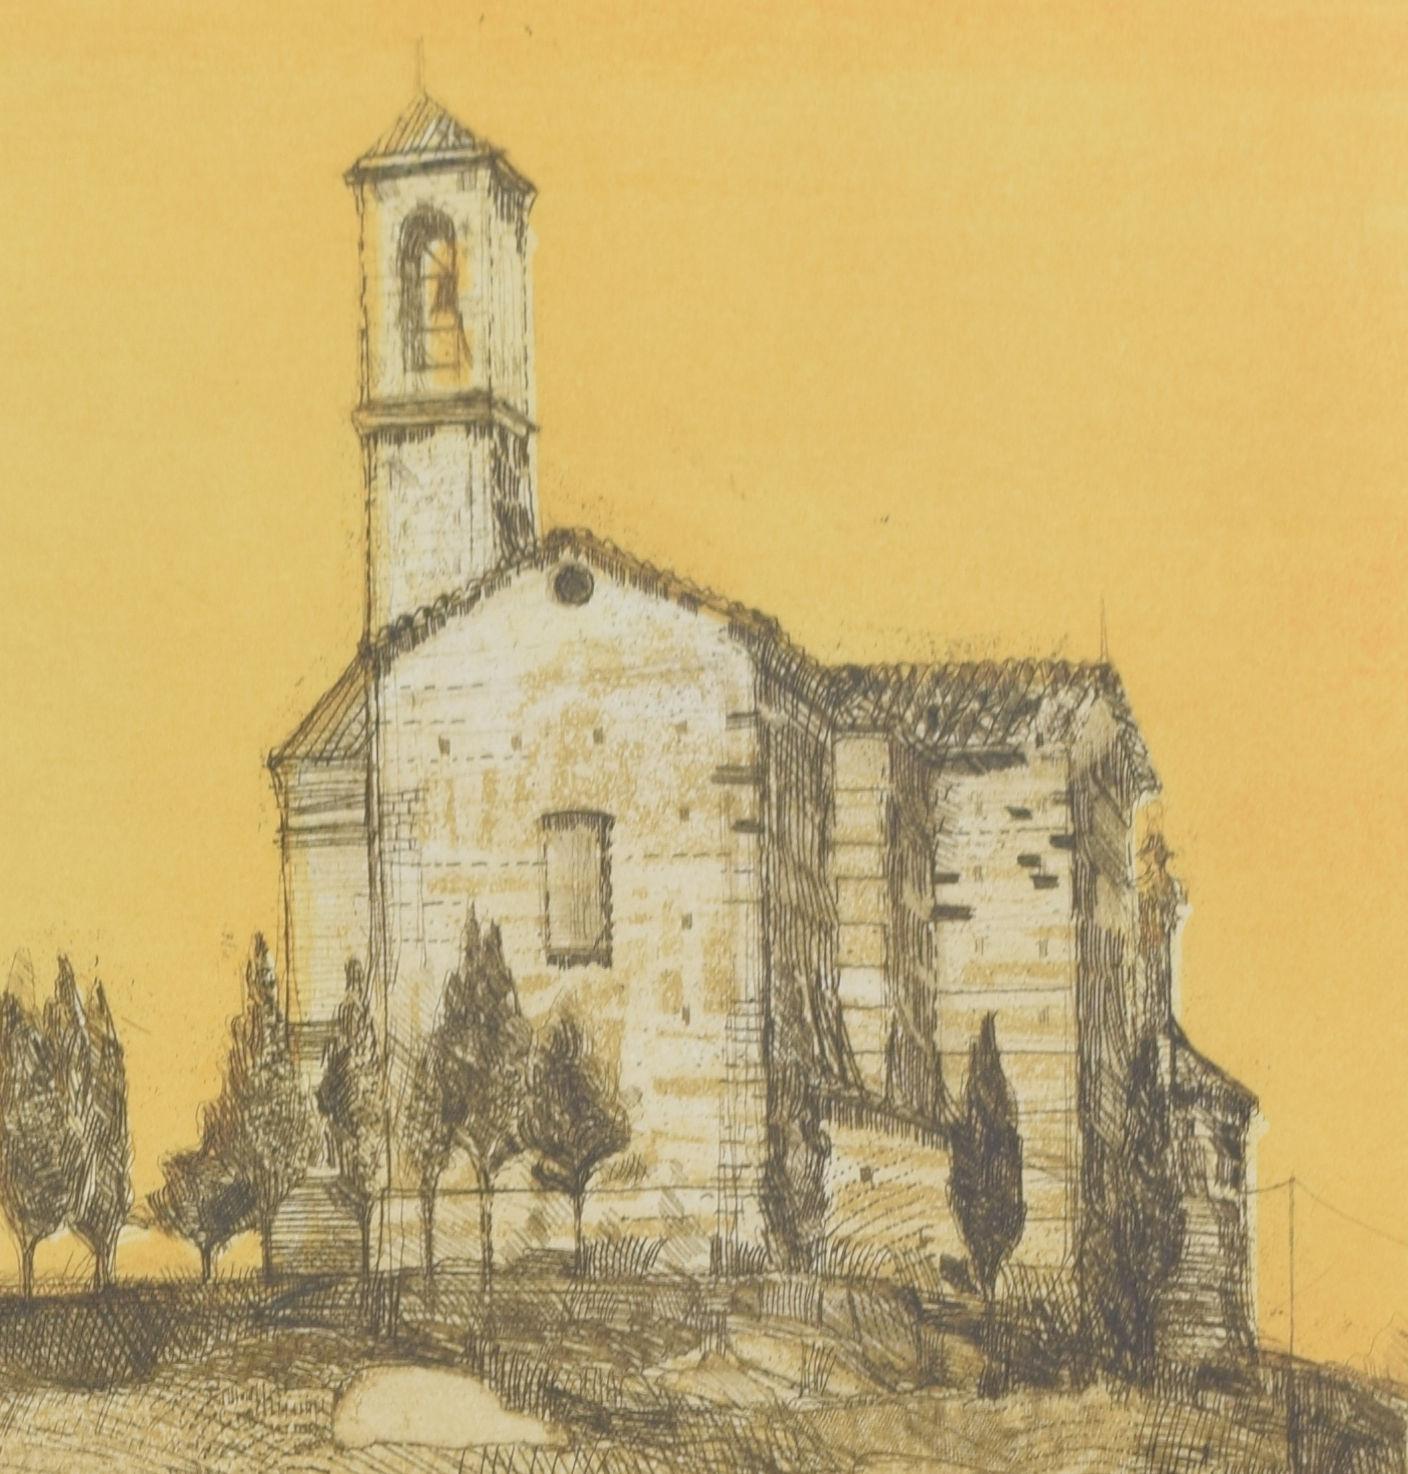 Volterra, Tuscany, Italy etching by Richard Beer 1